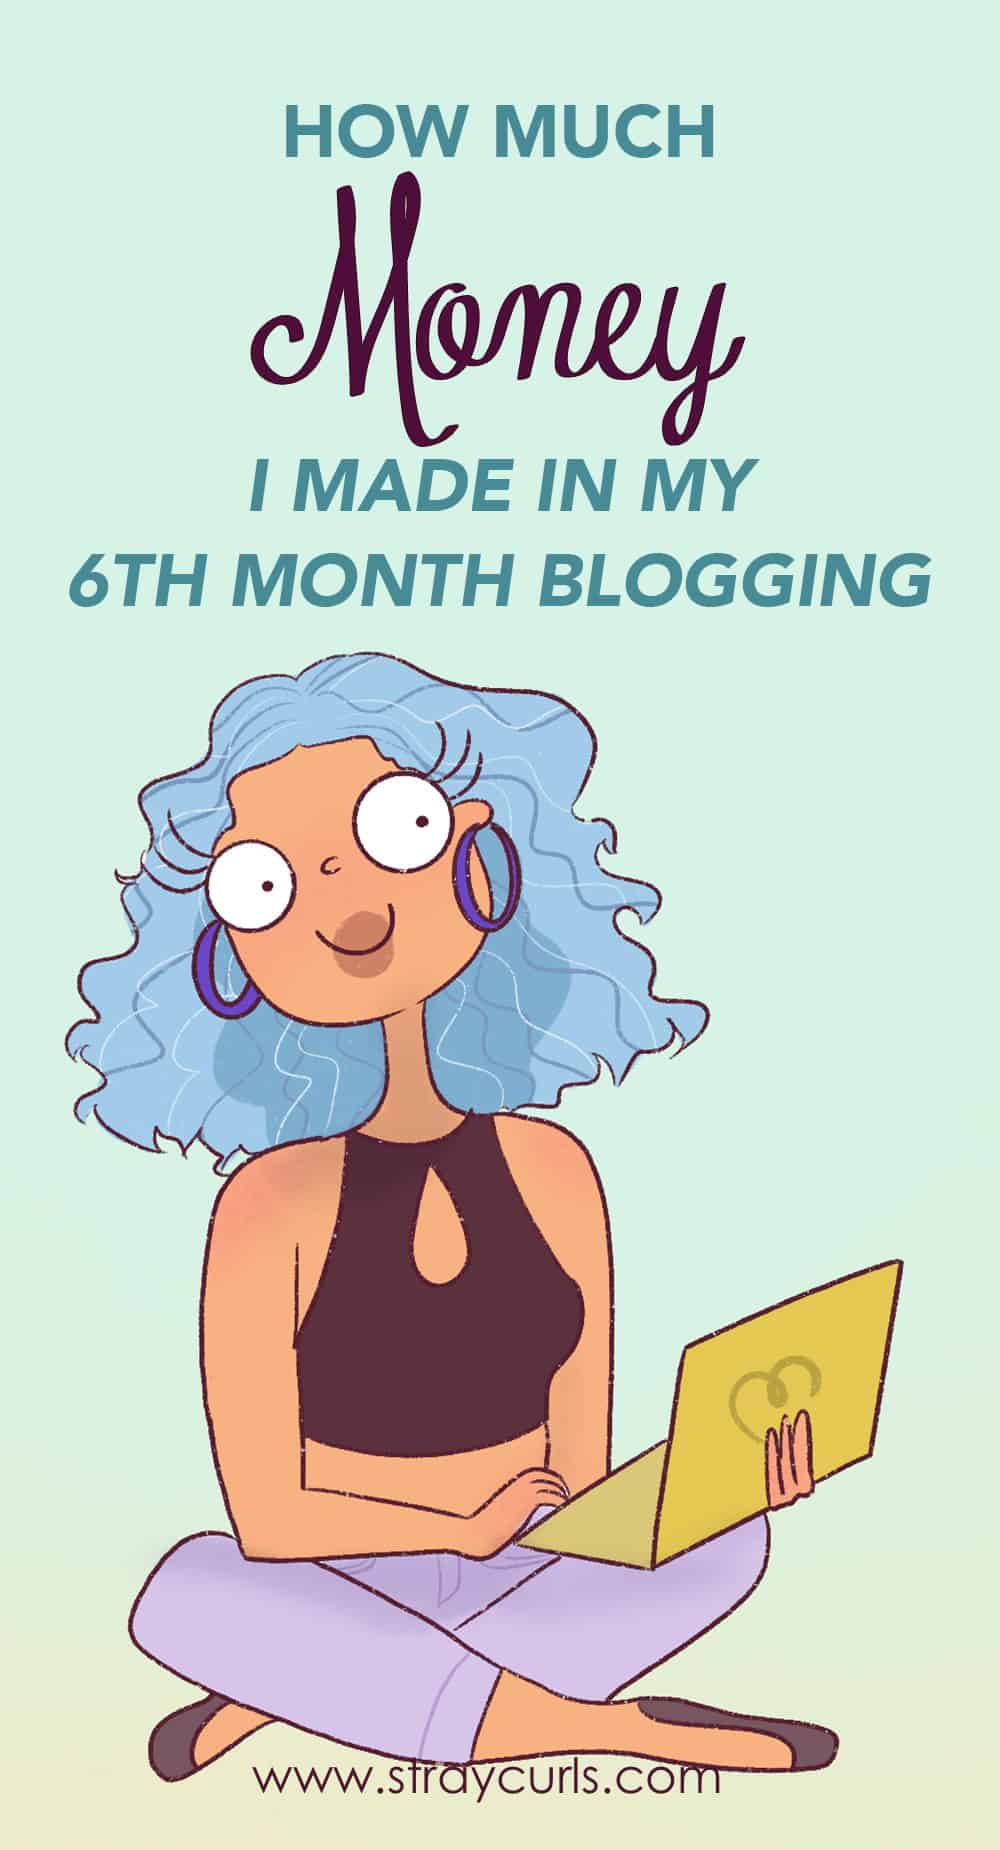 how much money I made in my 6th month blogging